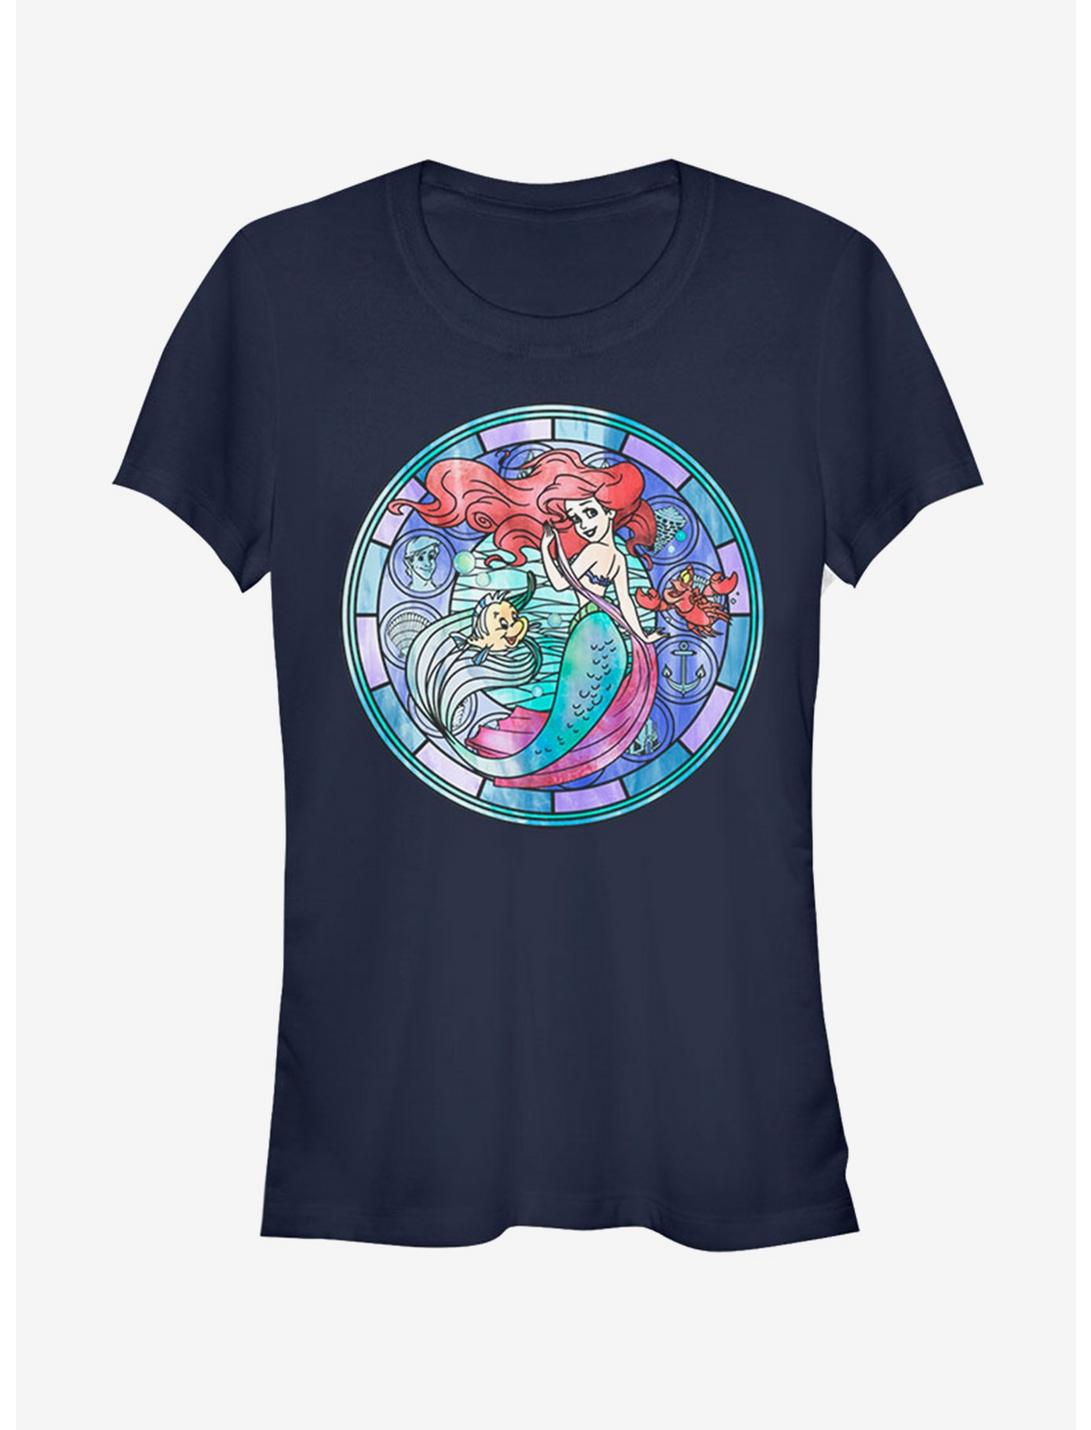 Disney The Little Mermaid Ariel Stained Glass Girls T-Shirt, NAVY, hi-res